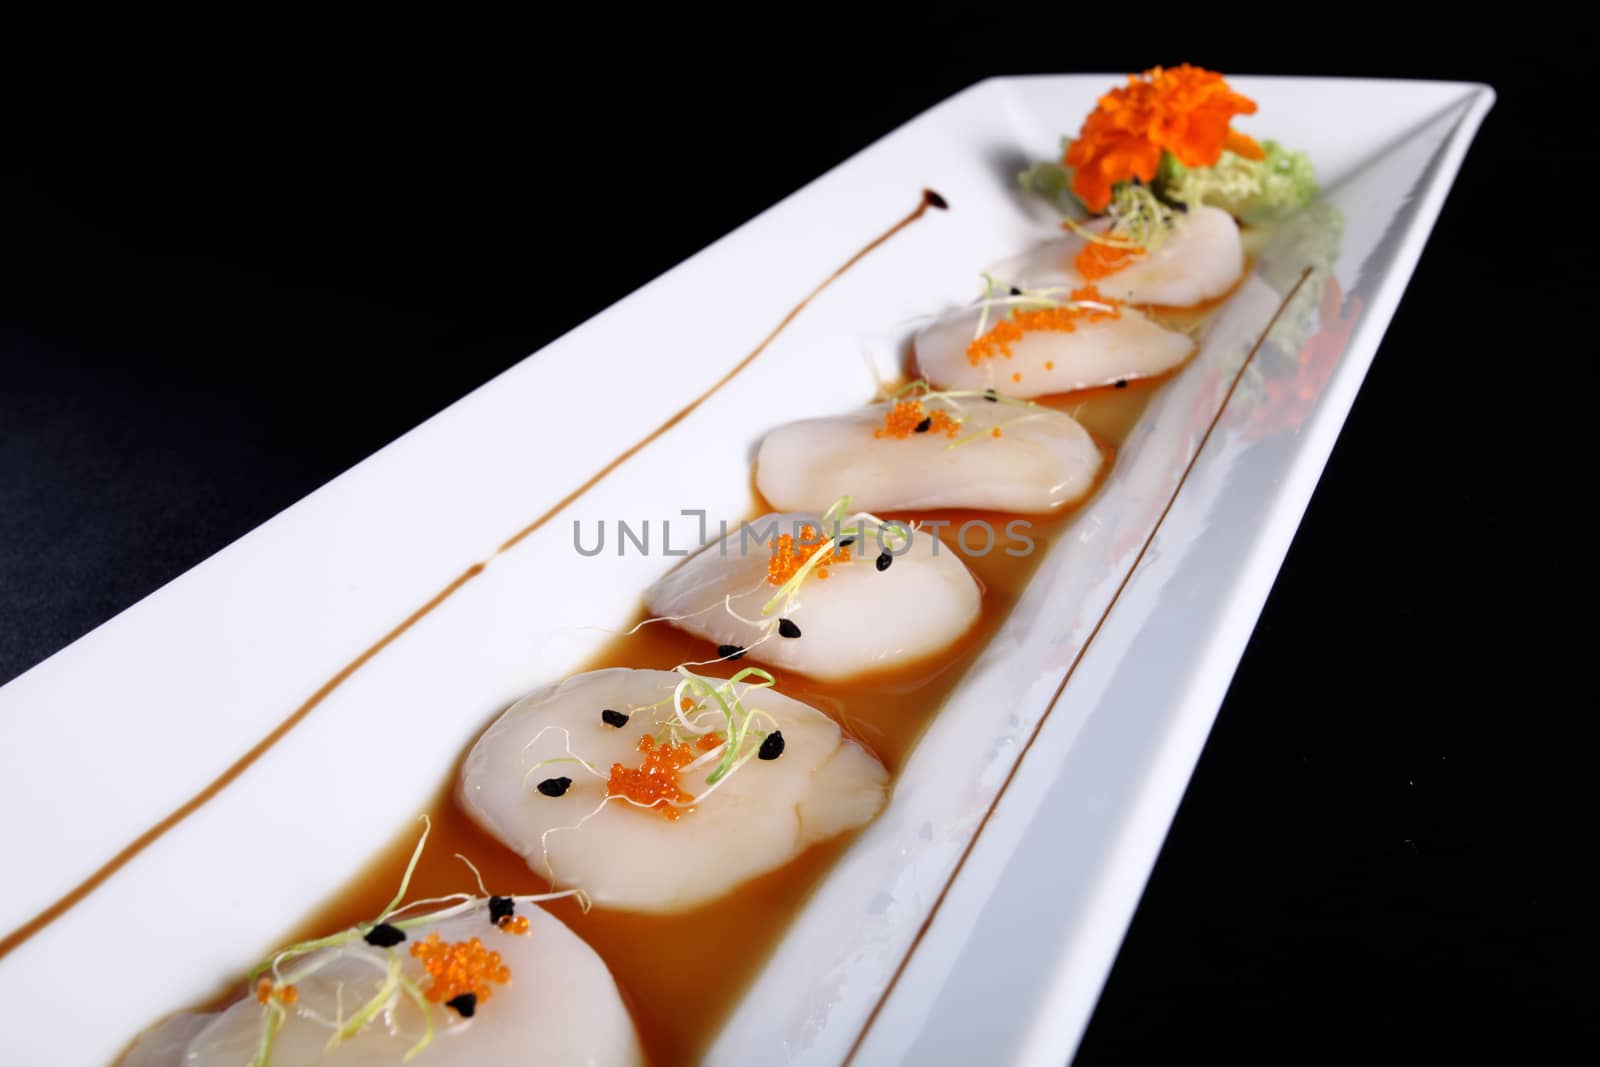 diced scallops with sauce on rectangular white plate, black background